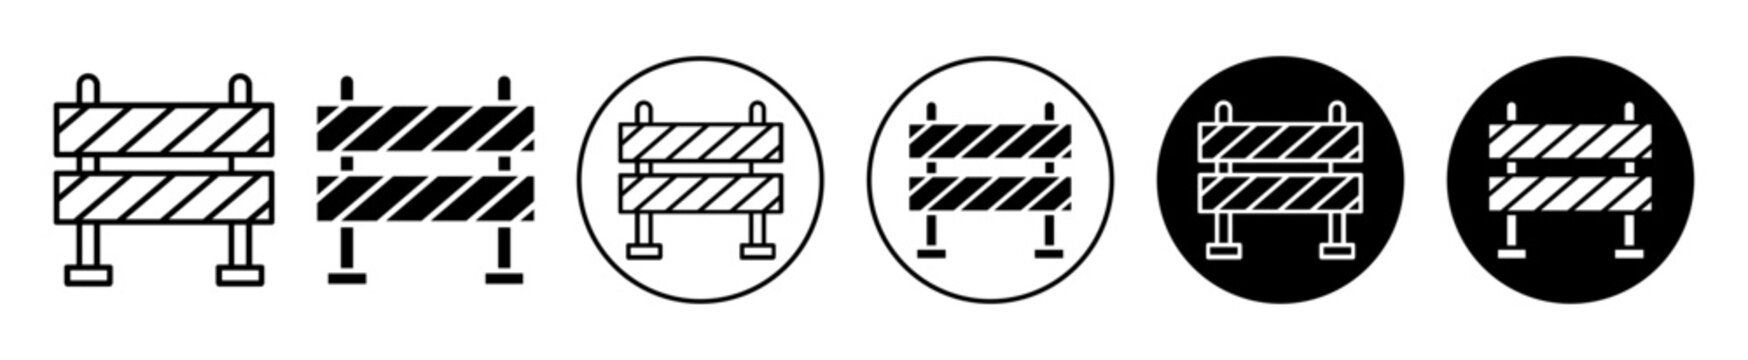 Entry Barrier icon set. closed road safety hazard Barrier vector symbol. roadblock barricade sign in black filled and outlined style.